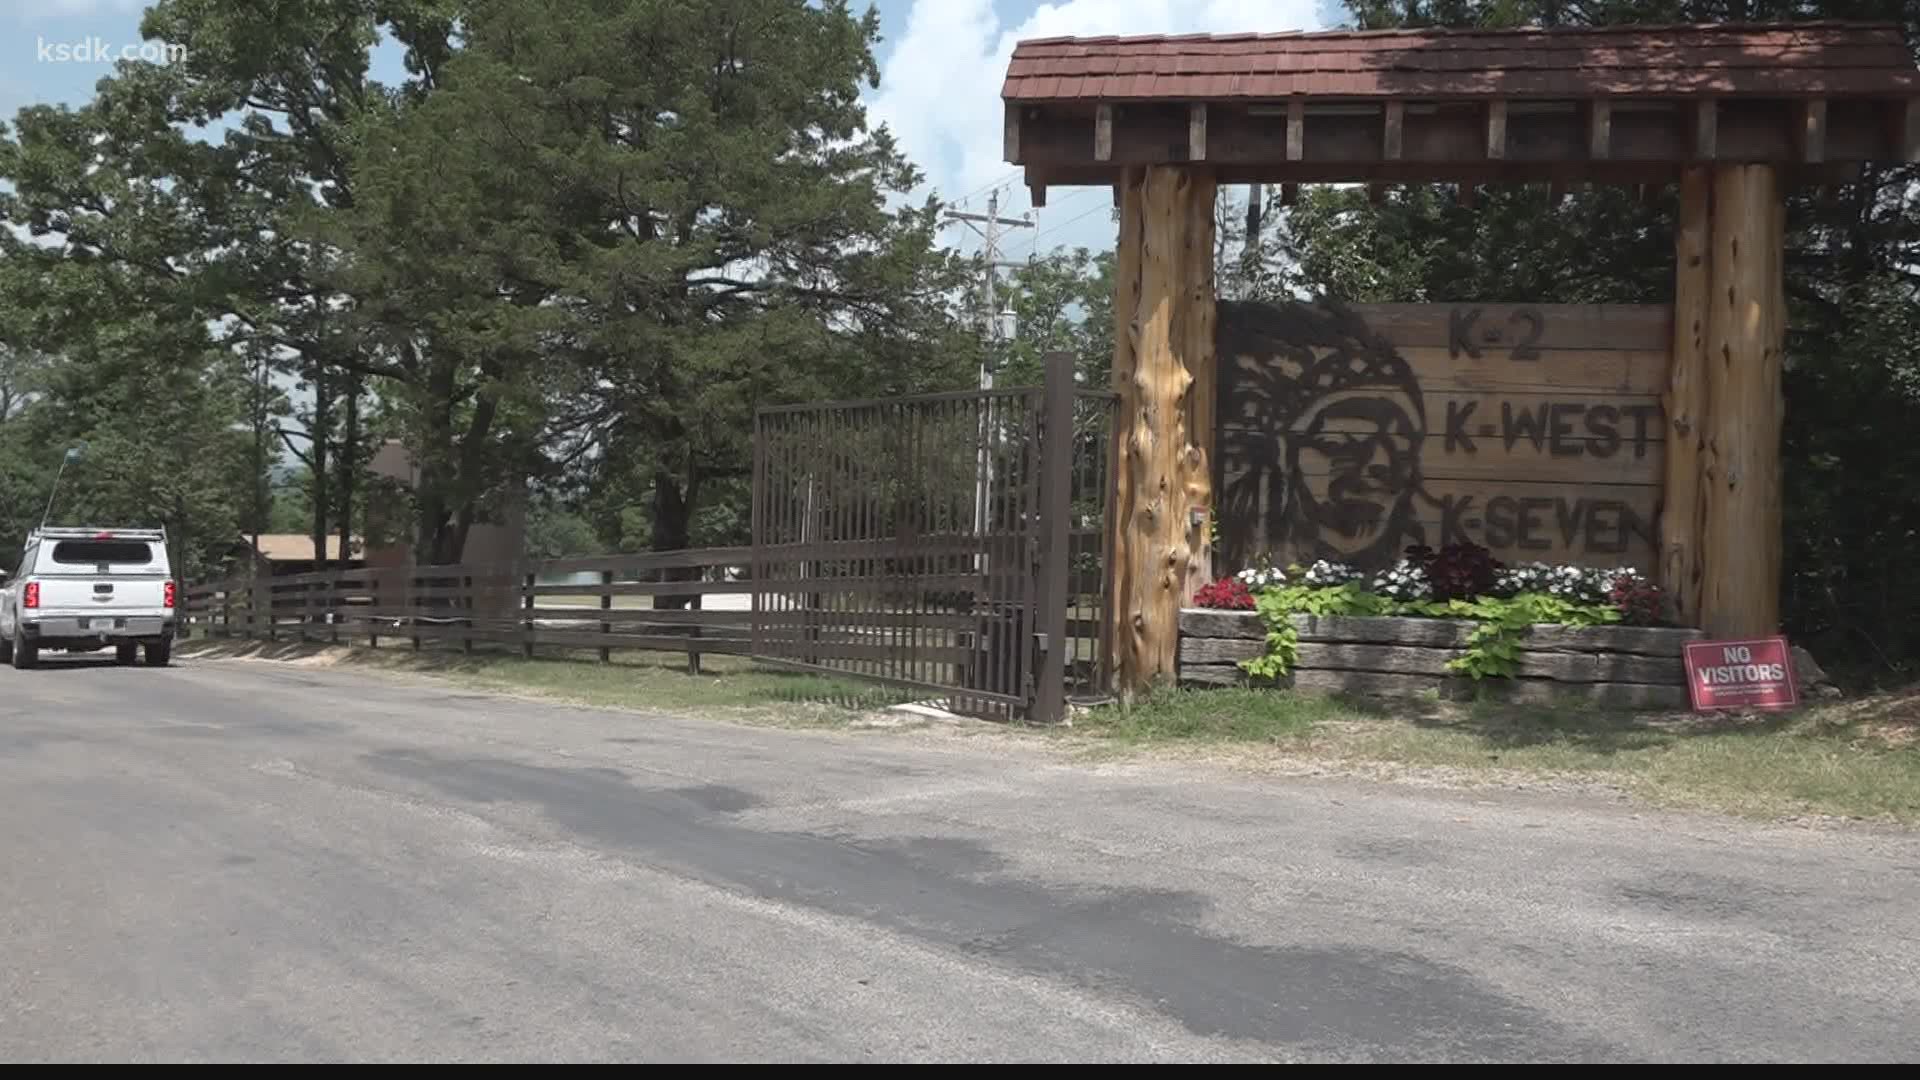 Dr. Randall Williams, director of the Missouri DHSS, said Monday that his agency had no plans to shut down summer camps in the wake of the outbreak.